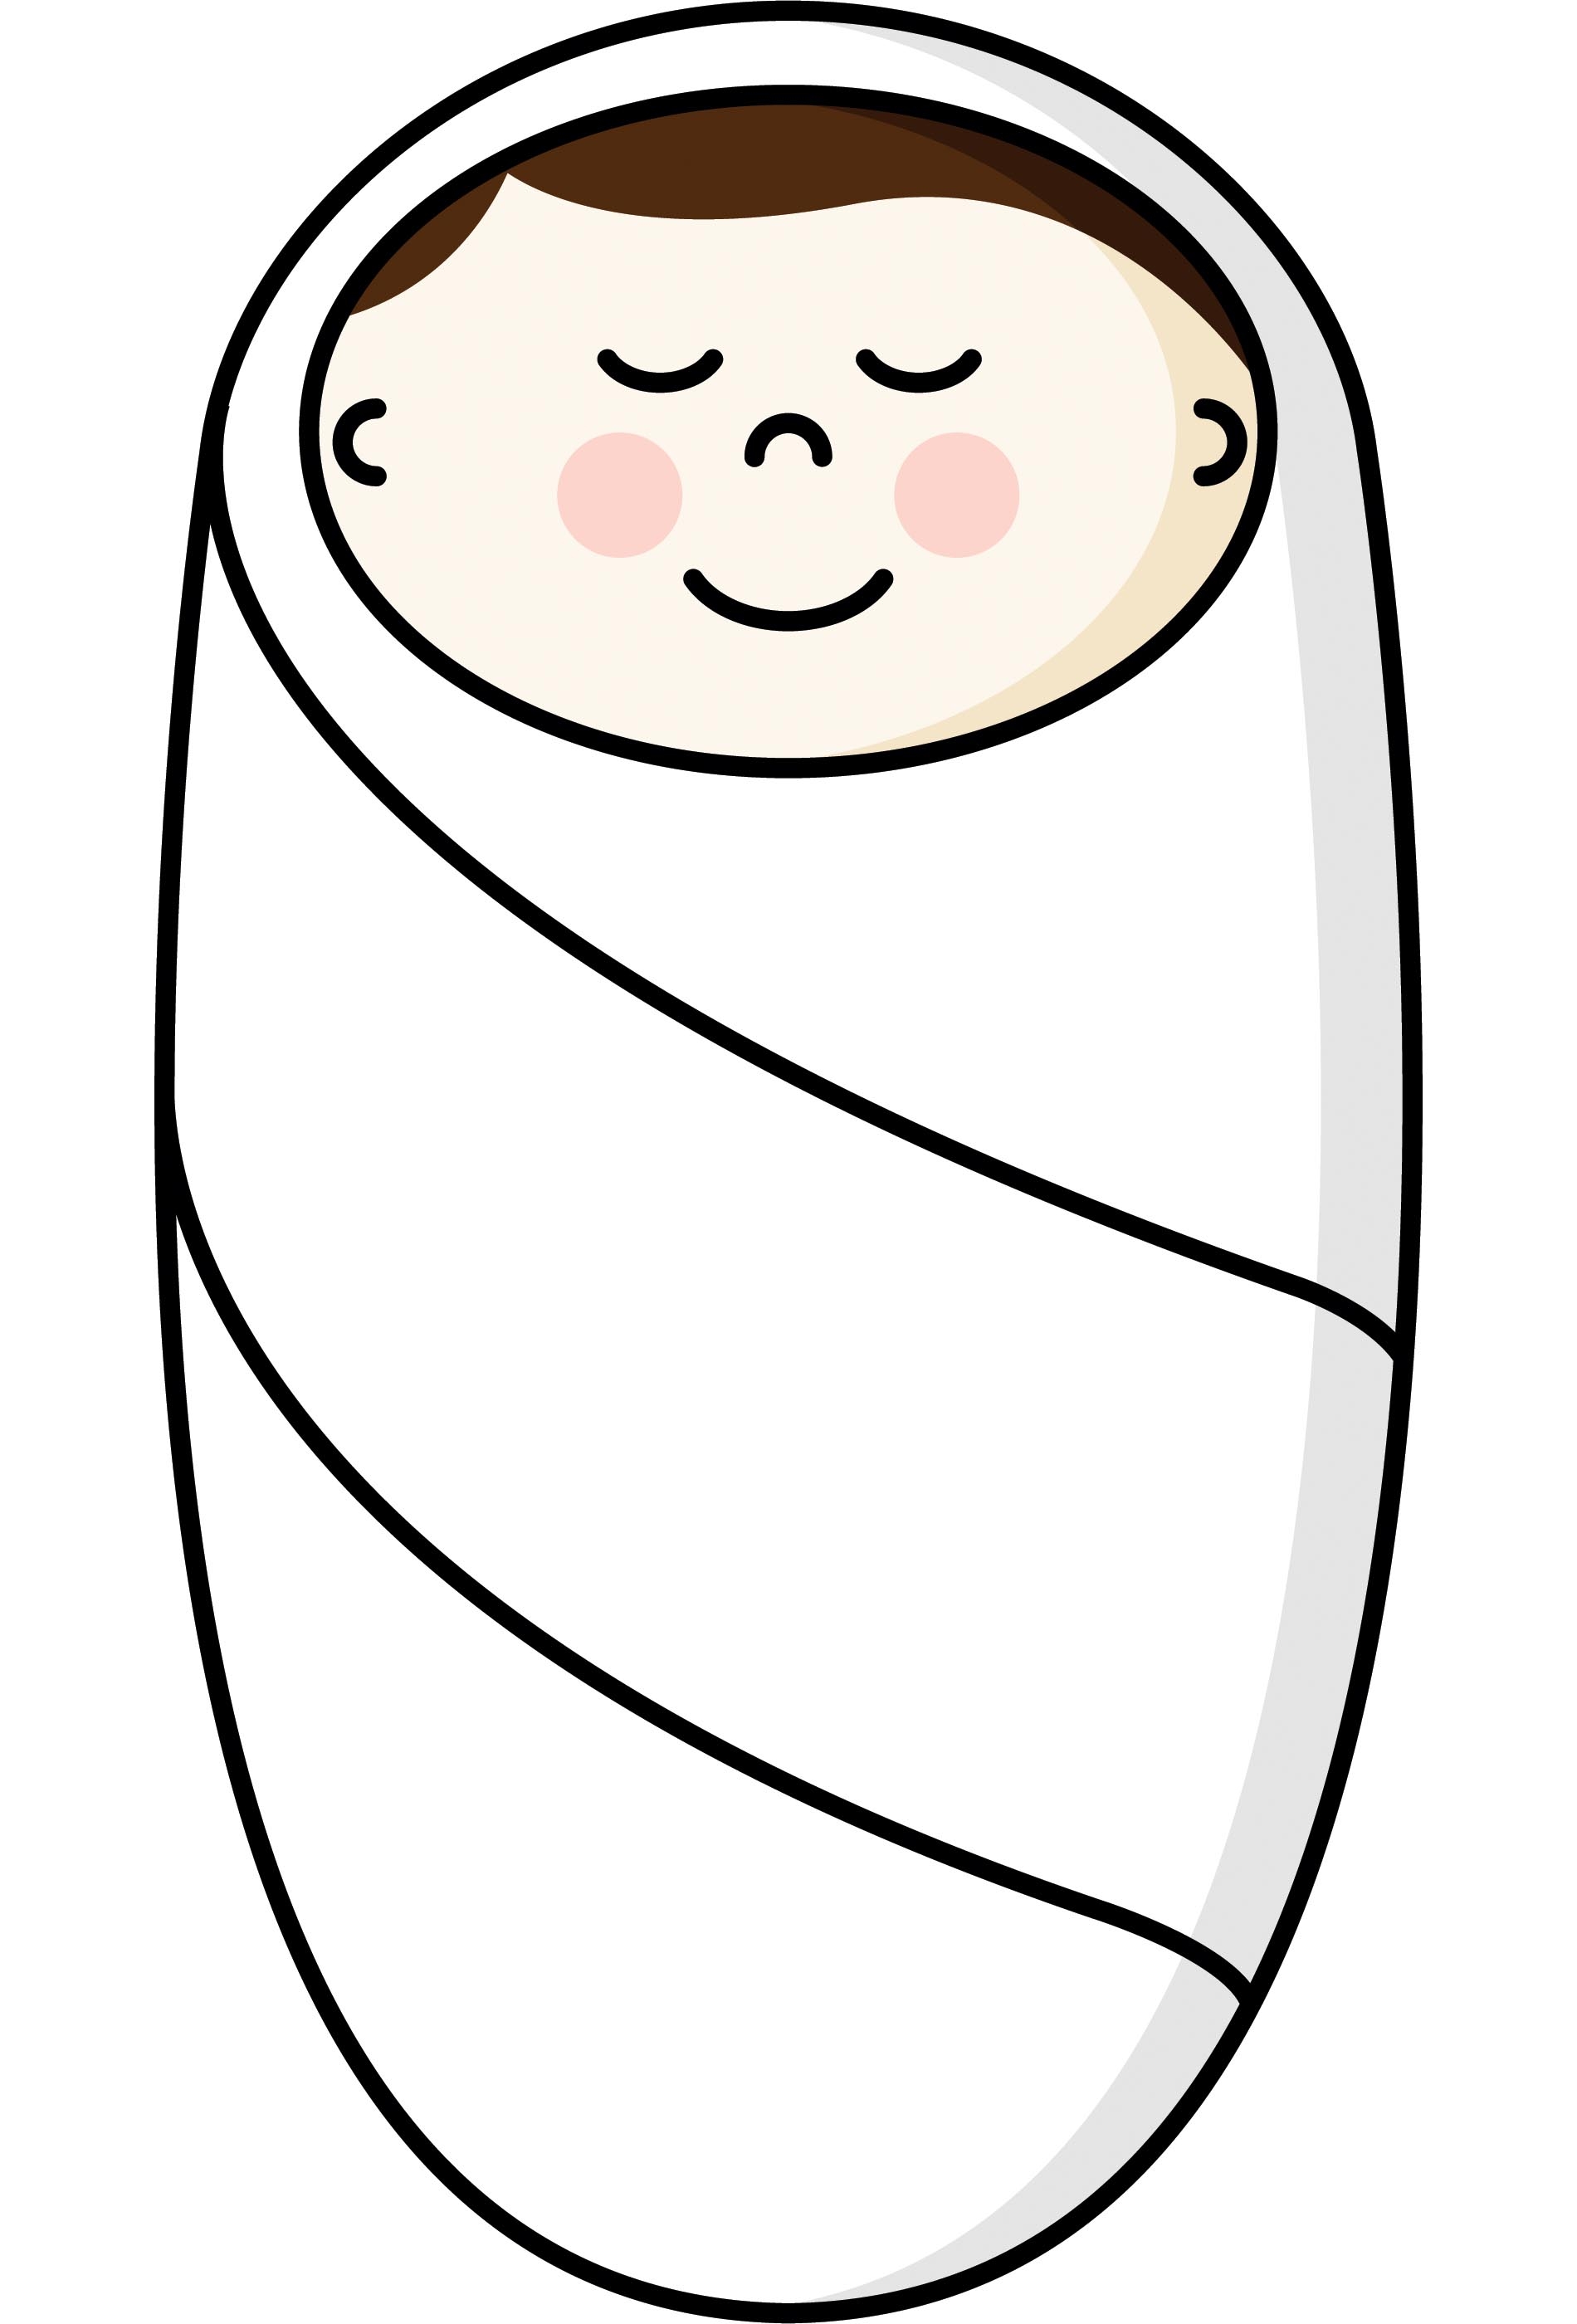 Chronicles of a Babywise Mom: Swaddling: When to Stop?